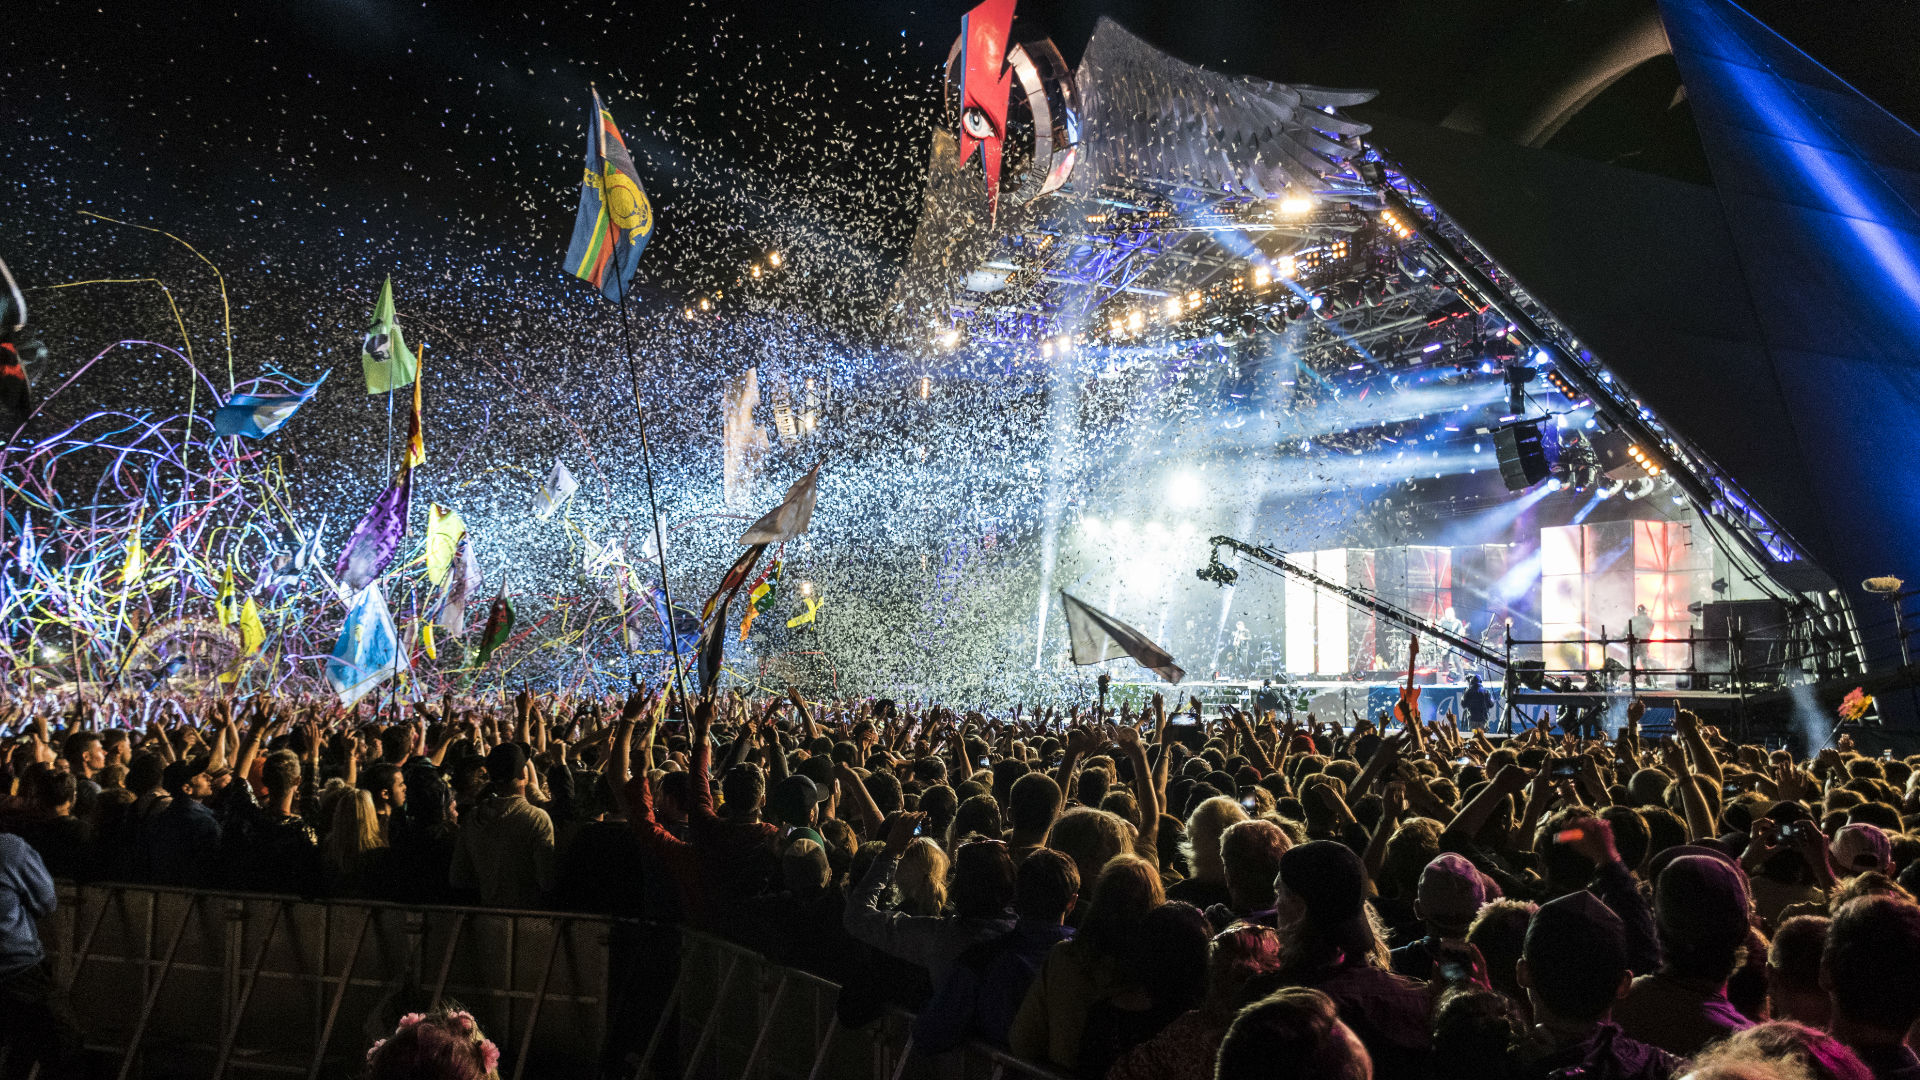 Glastonbury Festival will take place from 22-26 June 2022